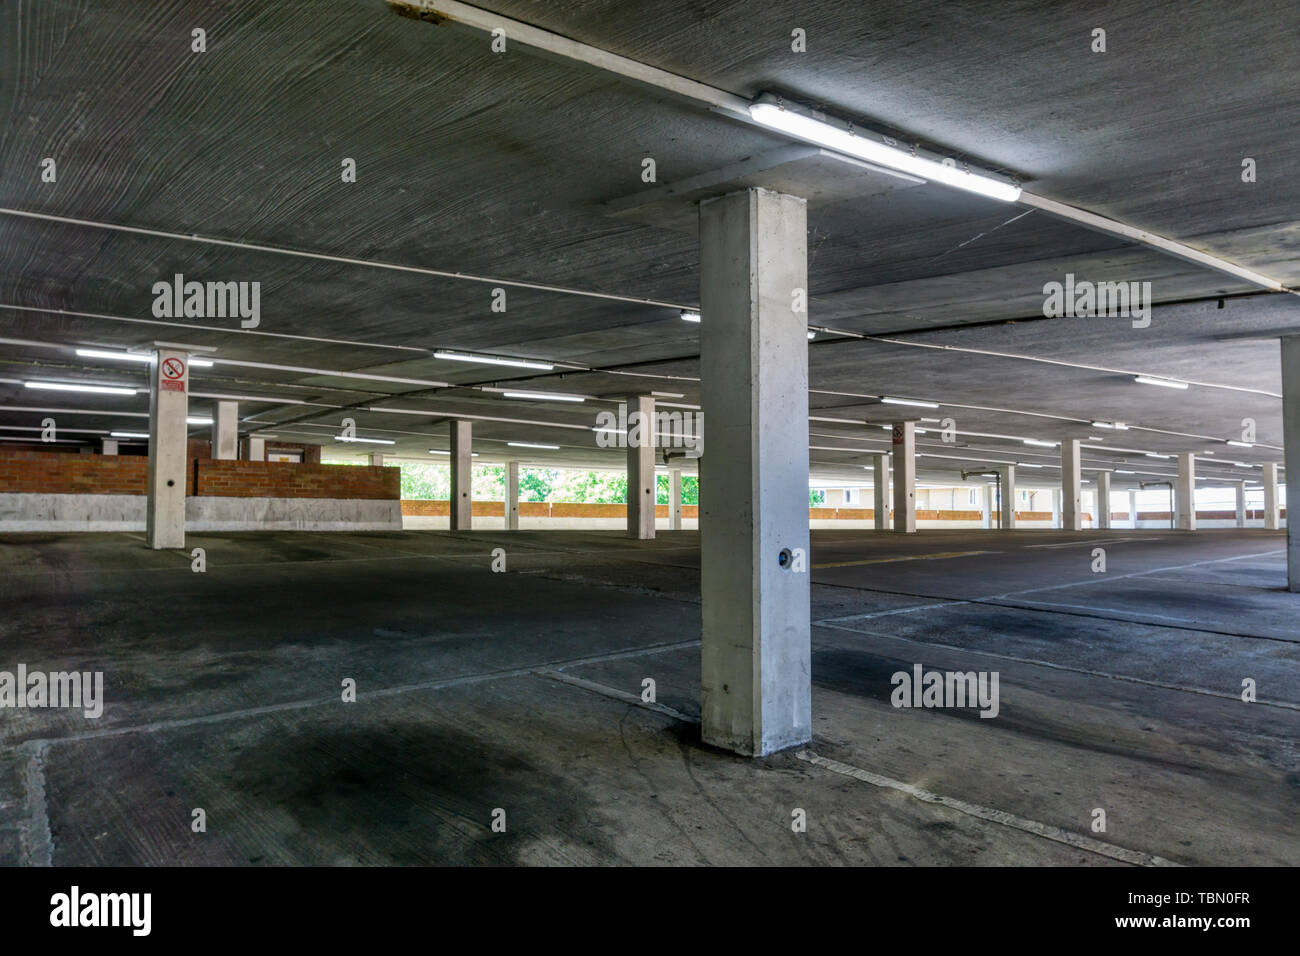 Empty floor or level of a multistorey car park. Stock Photo